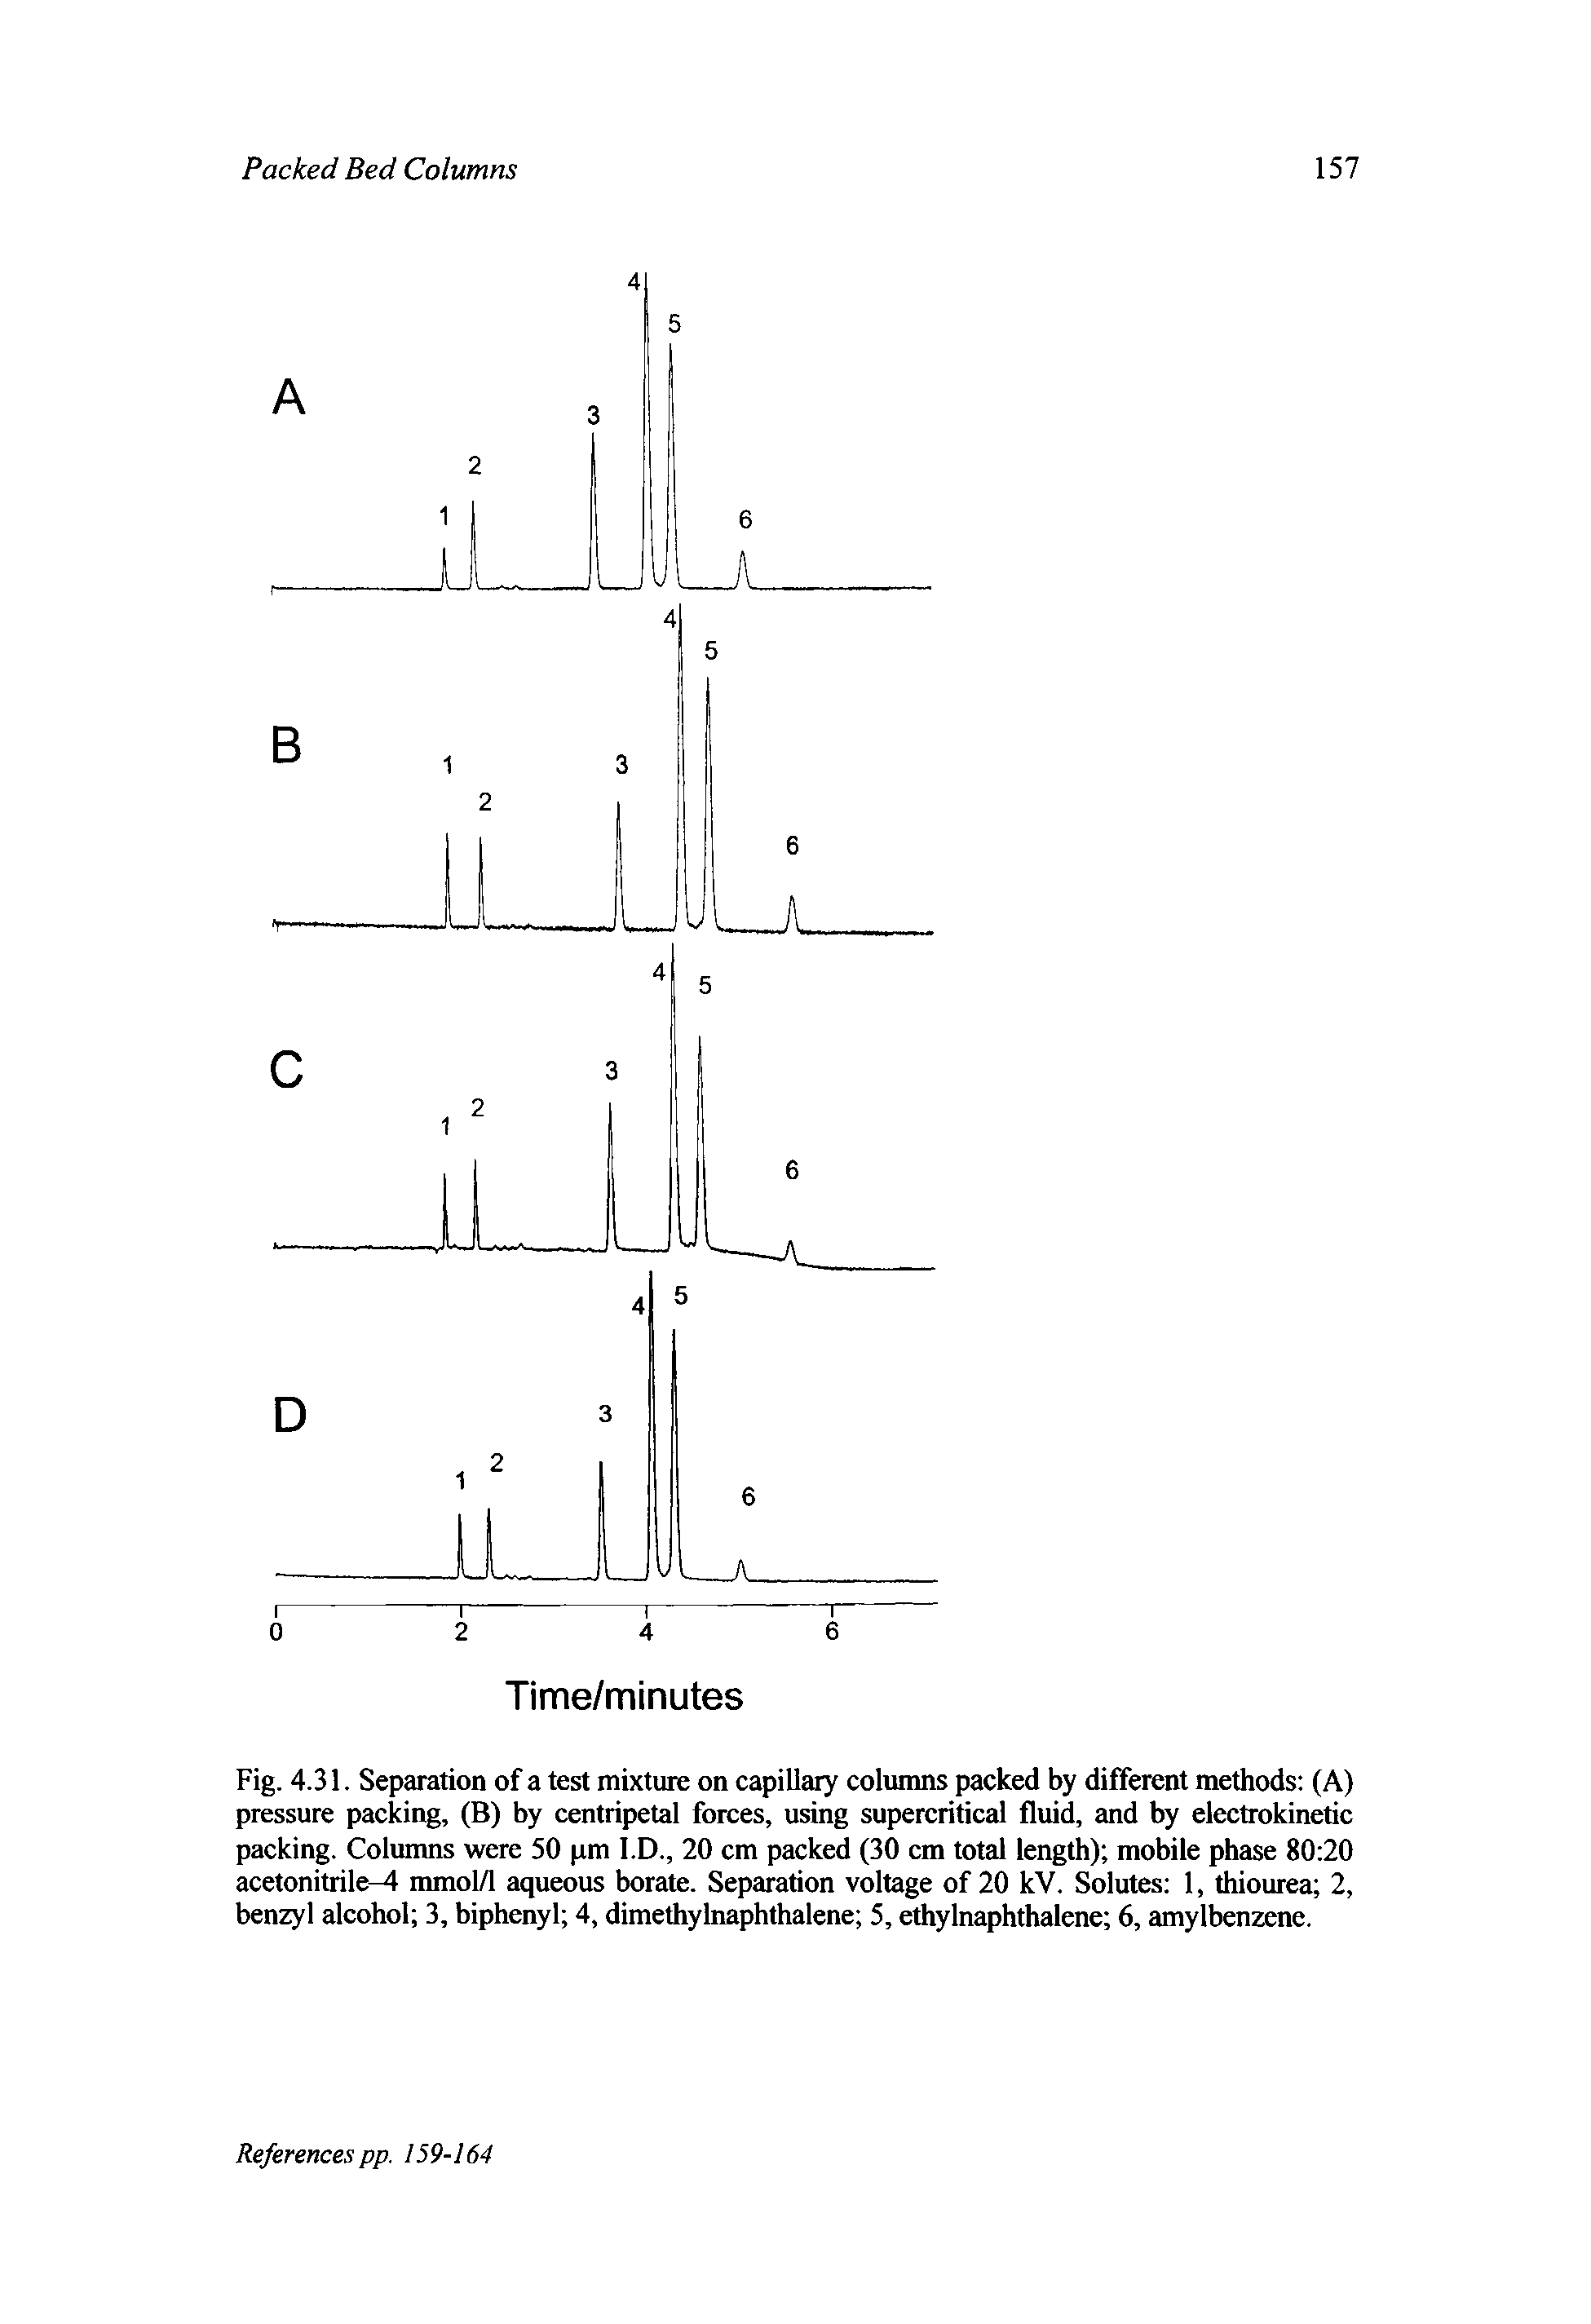 Fig. 4.31. Separation of a test mixture on capillary columns packed by different methods (A) pressure packing, (B) by centripetal forces, using supercritical fluid, and by electrokinetic packing. Columns were 50 pm I.D., 20 cm packed (30 cm total length) mobile phase 80 20 acetonitrile-4 mmol/1 aqueous borate. Separation voltage of 20 kV. Solutes 1, thiourea 2, benzyl alcohol 3, biphenyl 4, dimethylnaphthalene 5, ethylnaphthalene 6, amylbenzene.